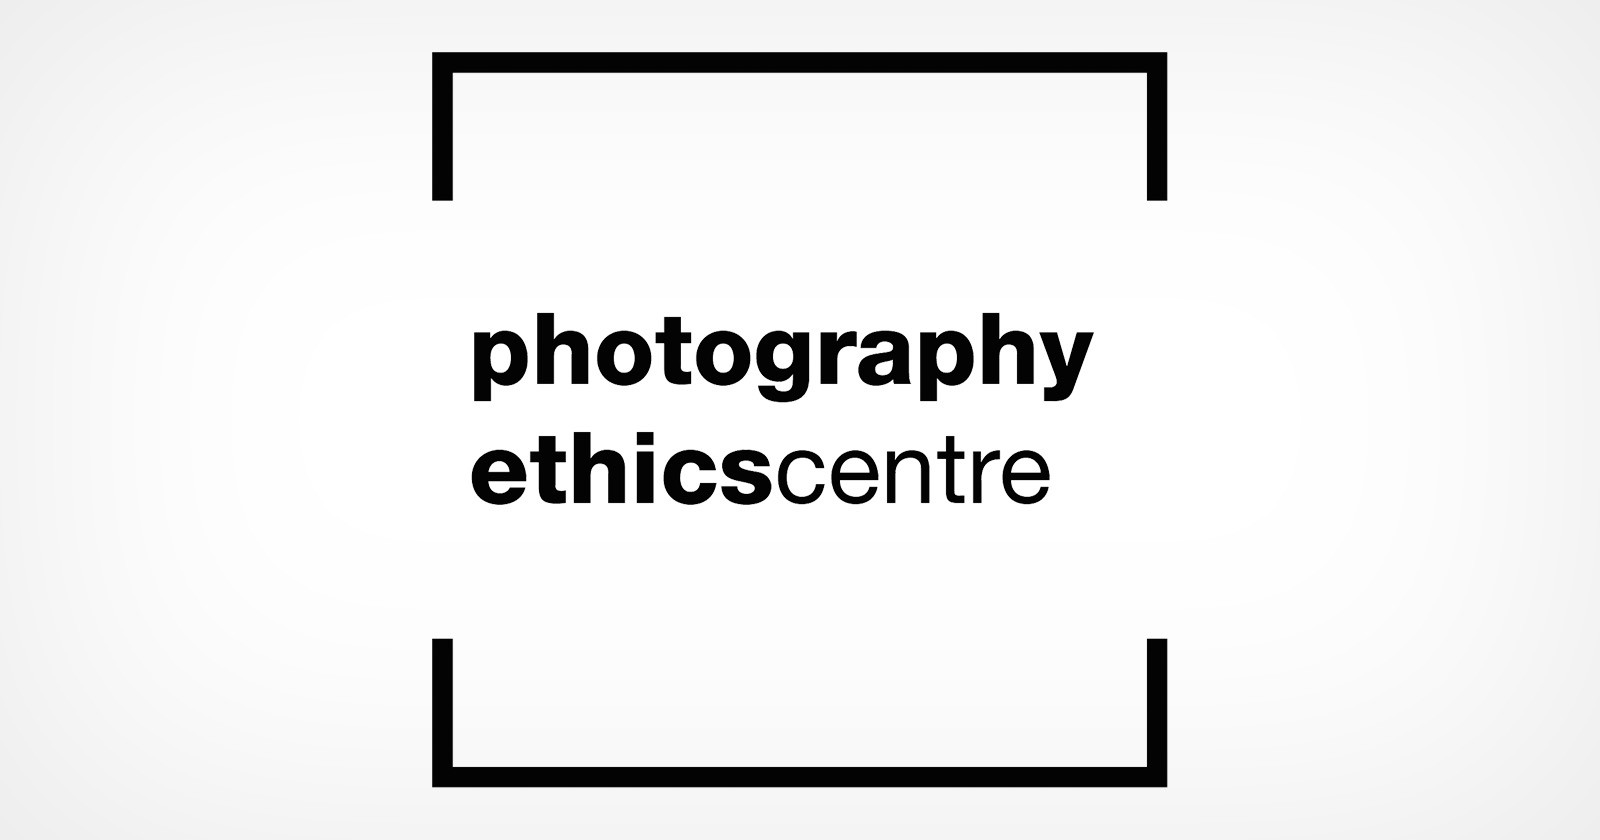 Ethics Center Wants All Photographers to Publish an Ethics Statement